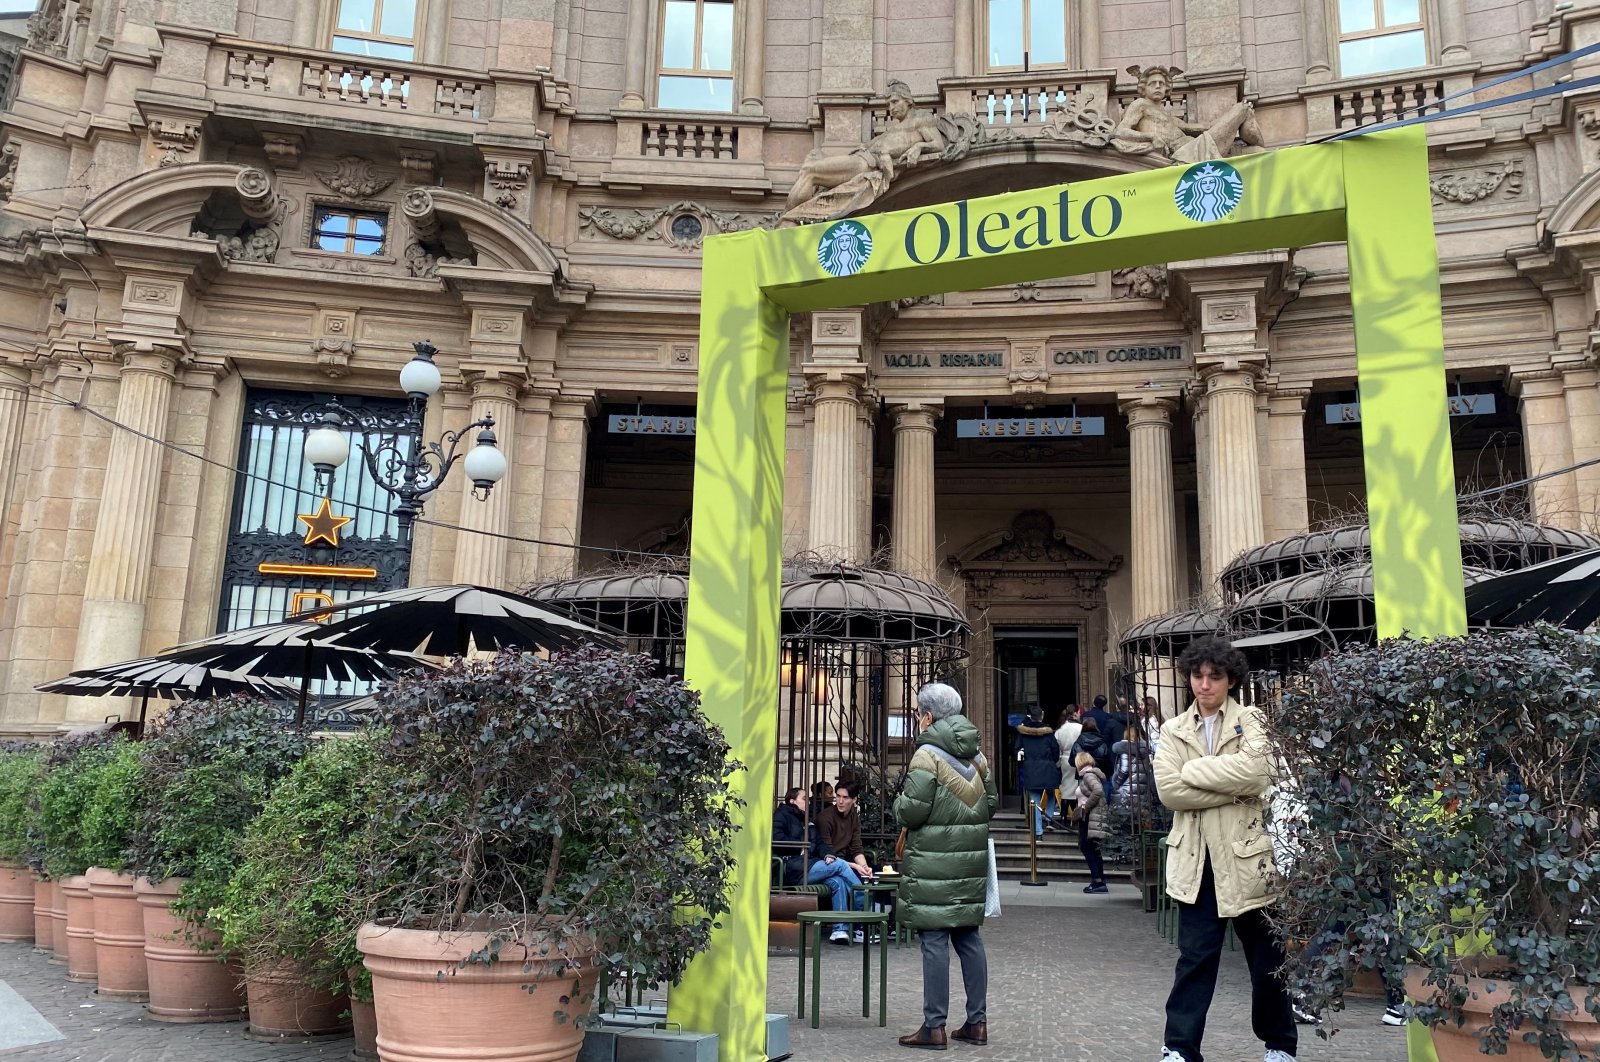 A view of the Starbucks Reserve Roastery in Milan&#039;s city center with a banner advertising the new &quot;Oleato&quot; olive oil-infused coffee in Milan, Italy, Feb. 22, 2023. (Reuters Photo)